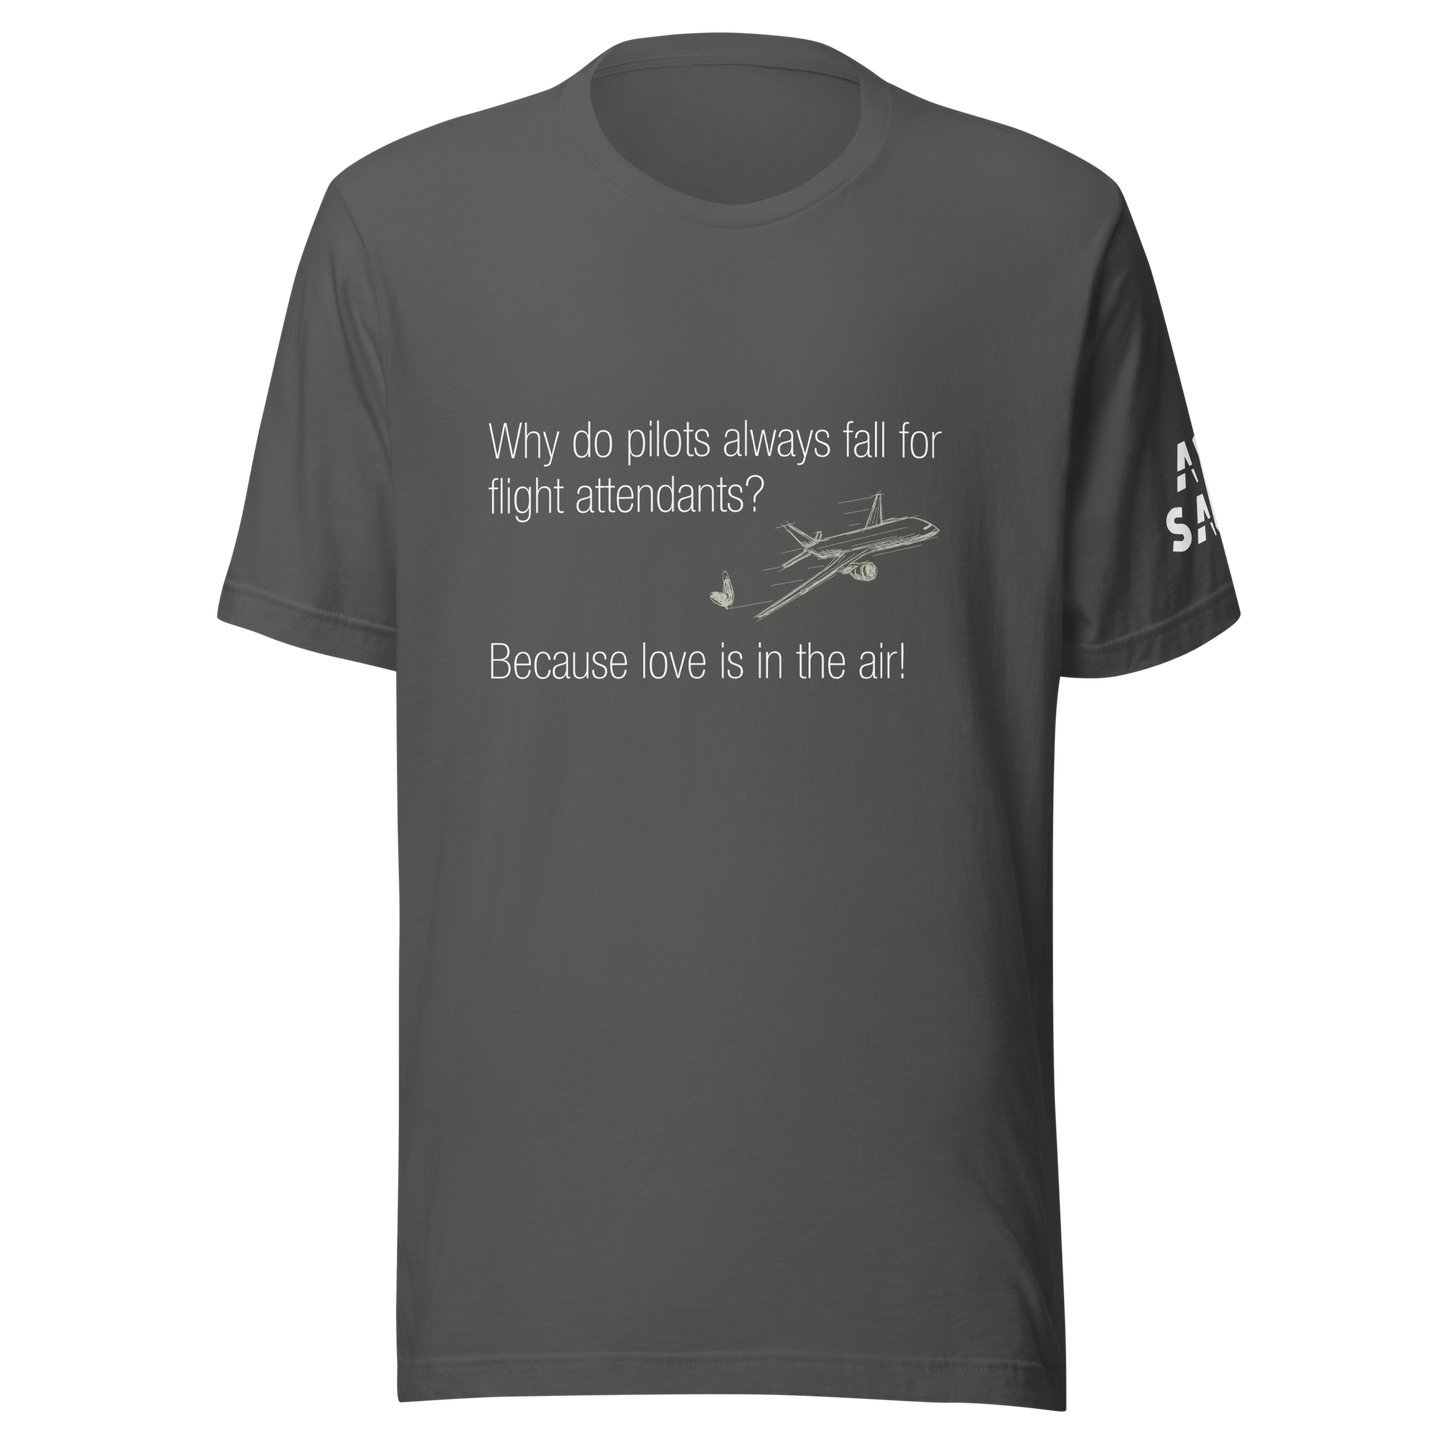 Love is in the Air - Pilot Humor T-Shirt